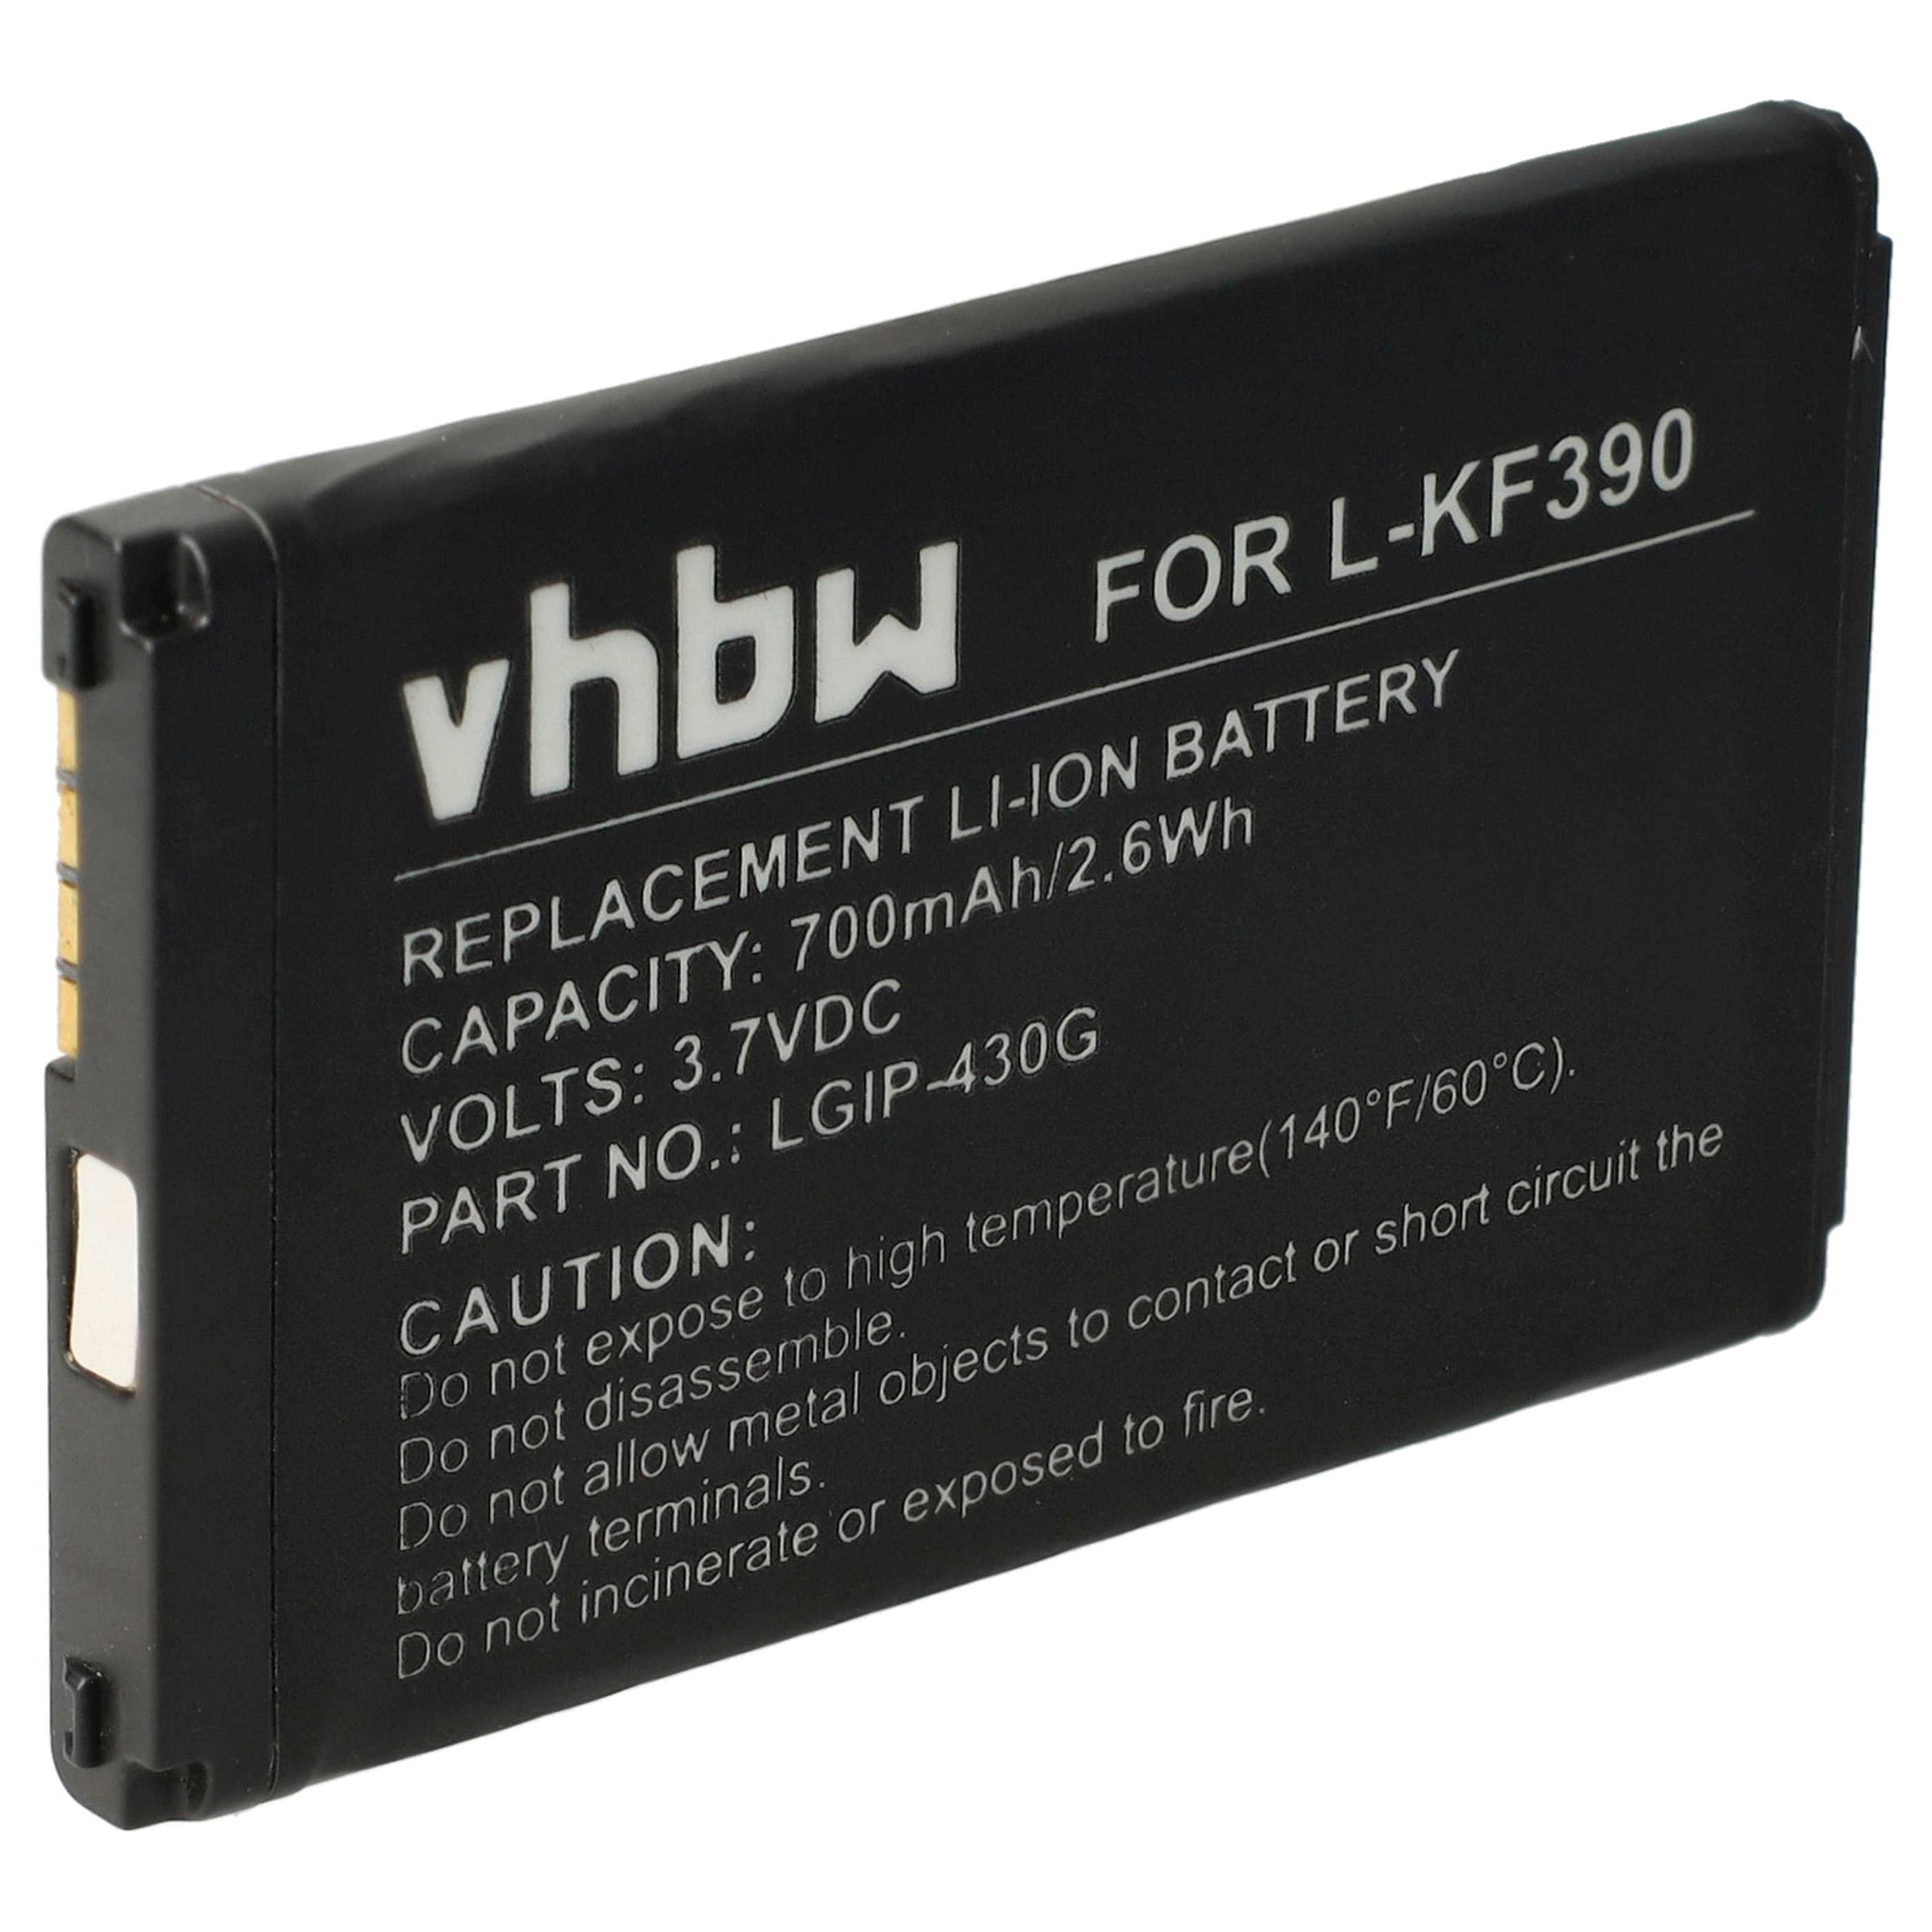 Mobile Phone Battery Replacement for LG IP-430G - 700 mAh 3.7 V Li-Ion